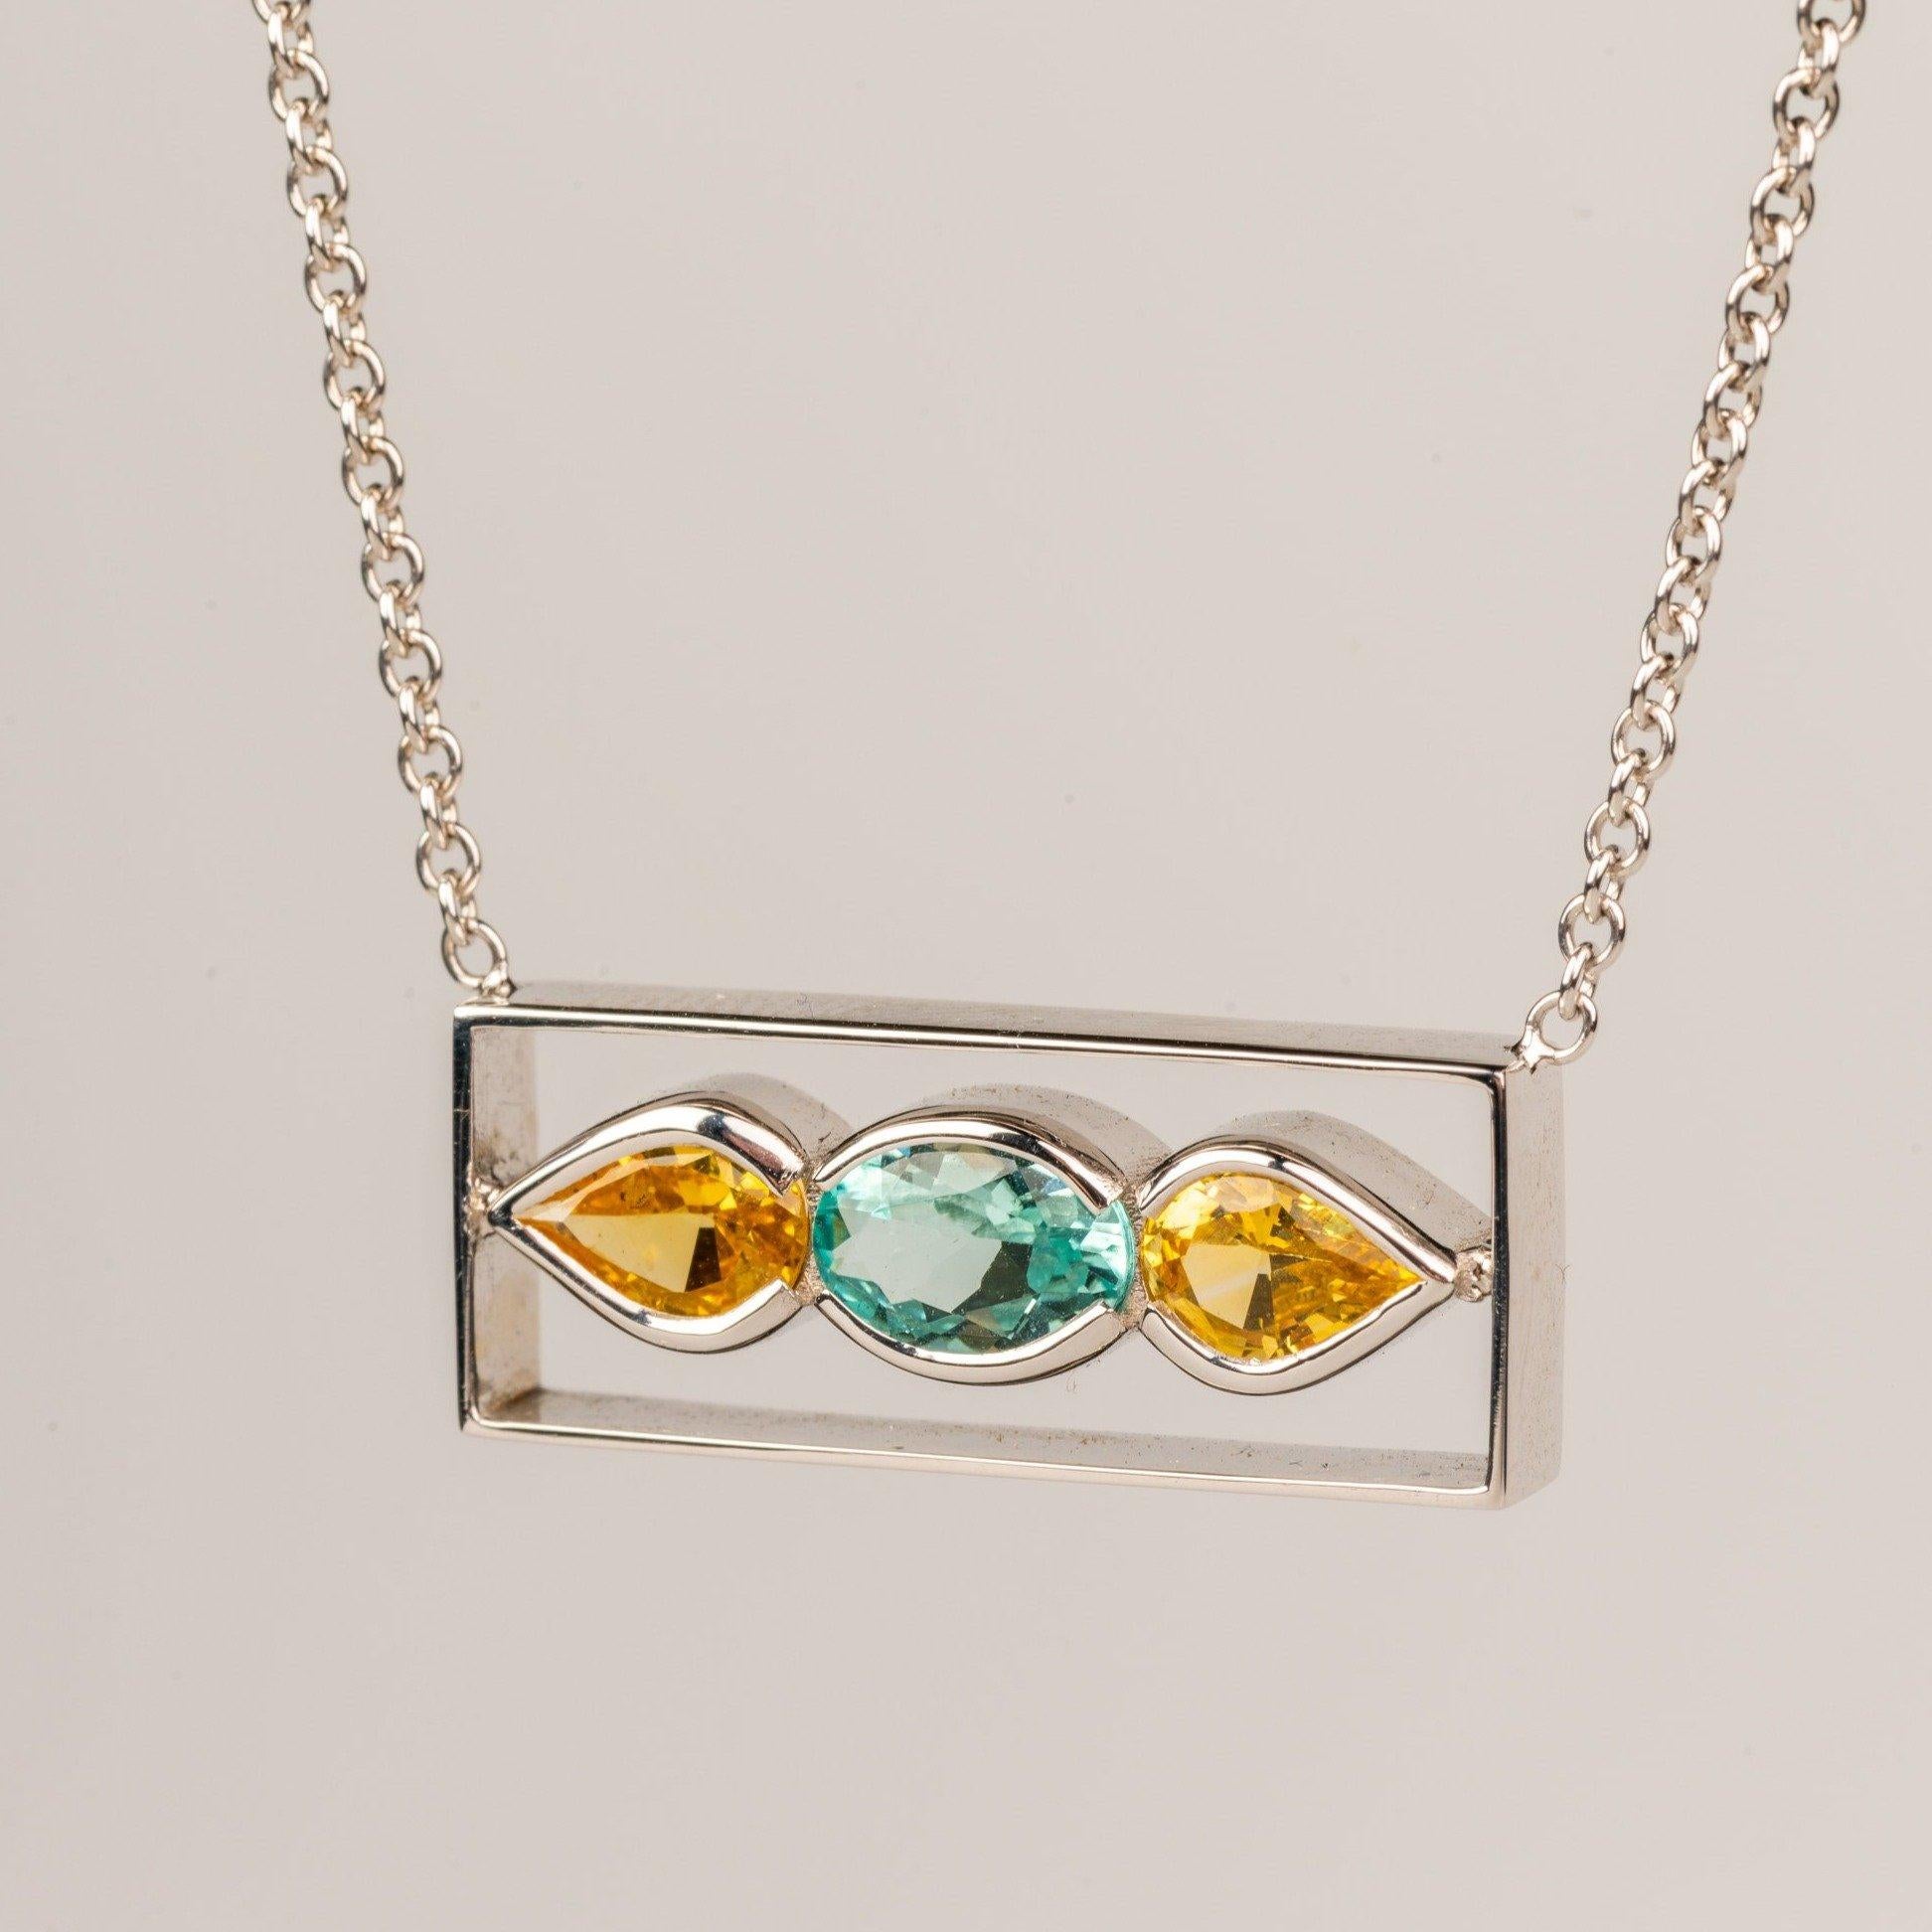 An 18k white gold bar necklace featuring one bezel set oval faceted blue tourmaline .66 carats and two pear shaped faceted yellow sapphires 1.12 carats, on a 16 inch white gold cable chain. This necklace was made and designed by Sydney Strong.